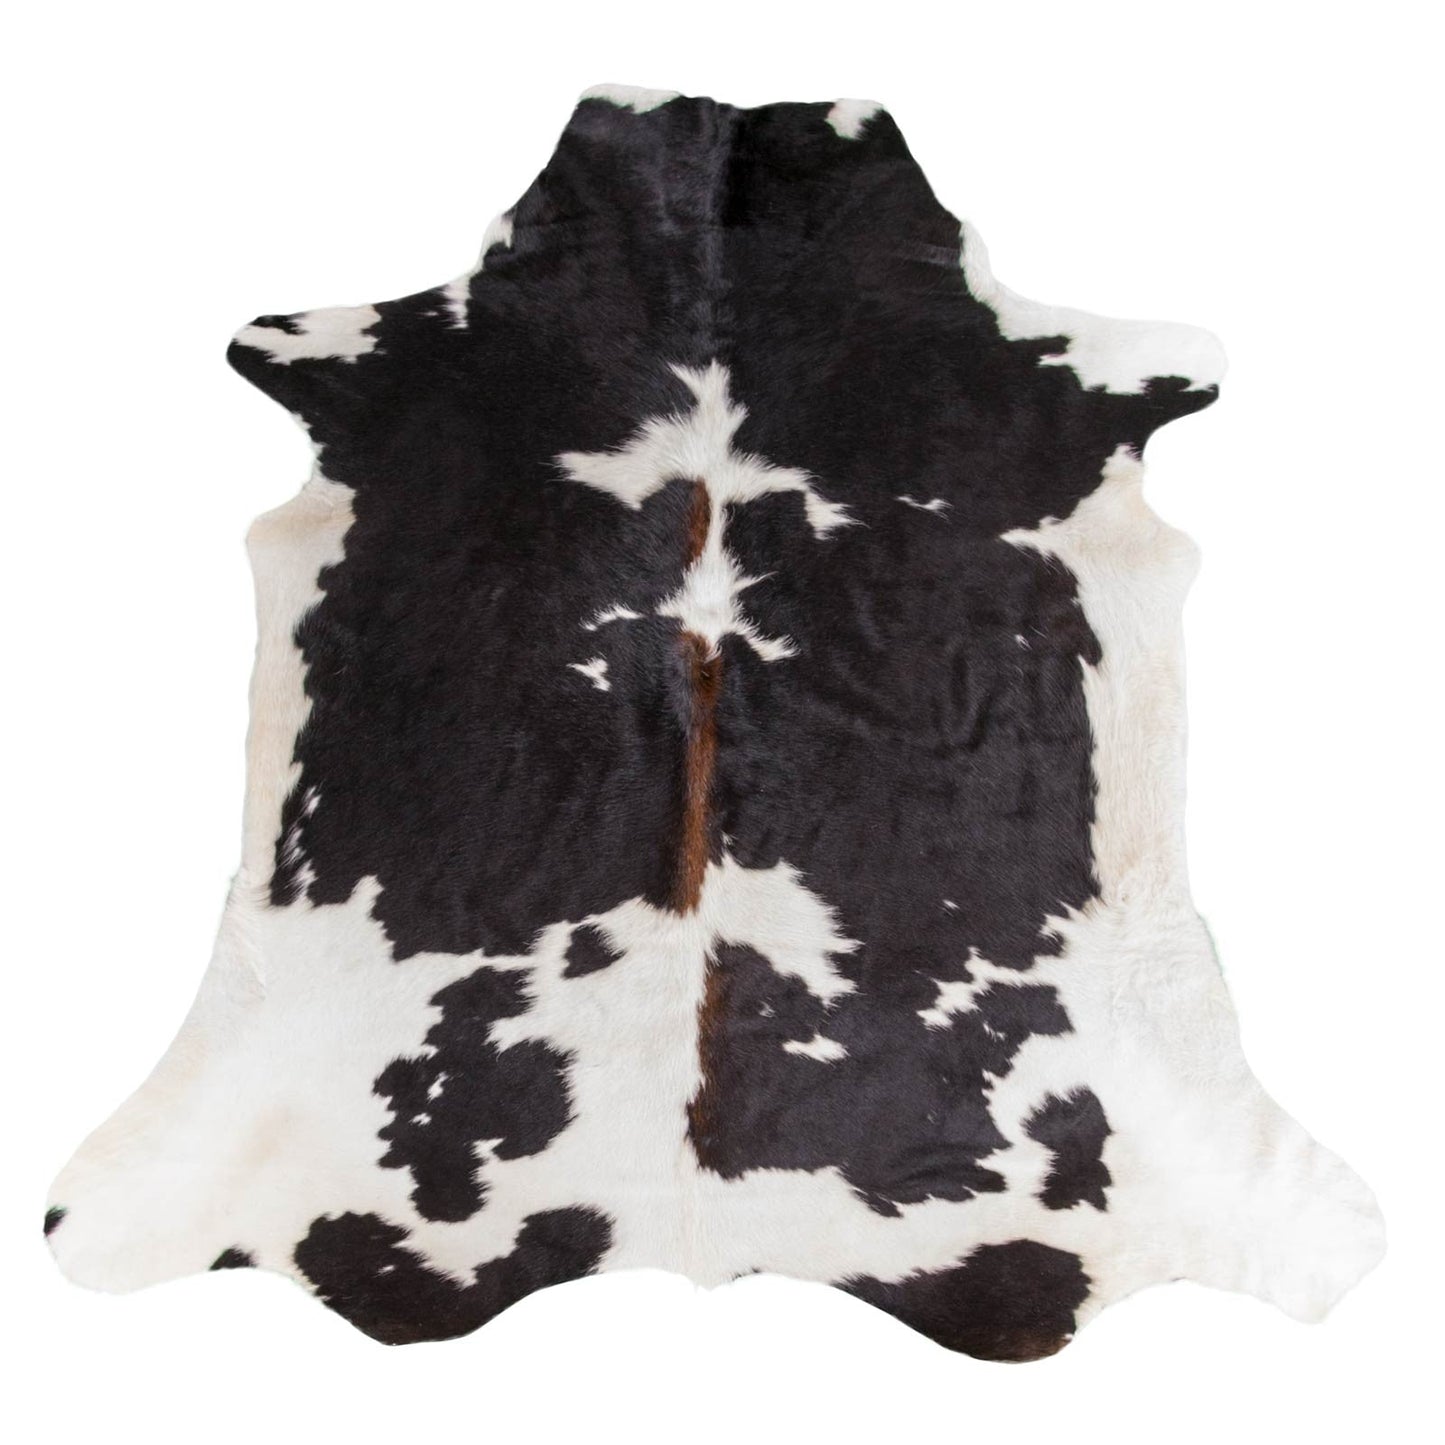 Black & White with Brown Shade Line Cowhide Rug - Rodeo Cowhide Rugs5x6